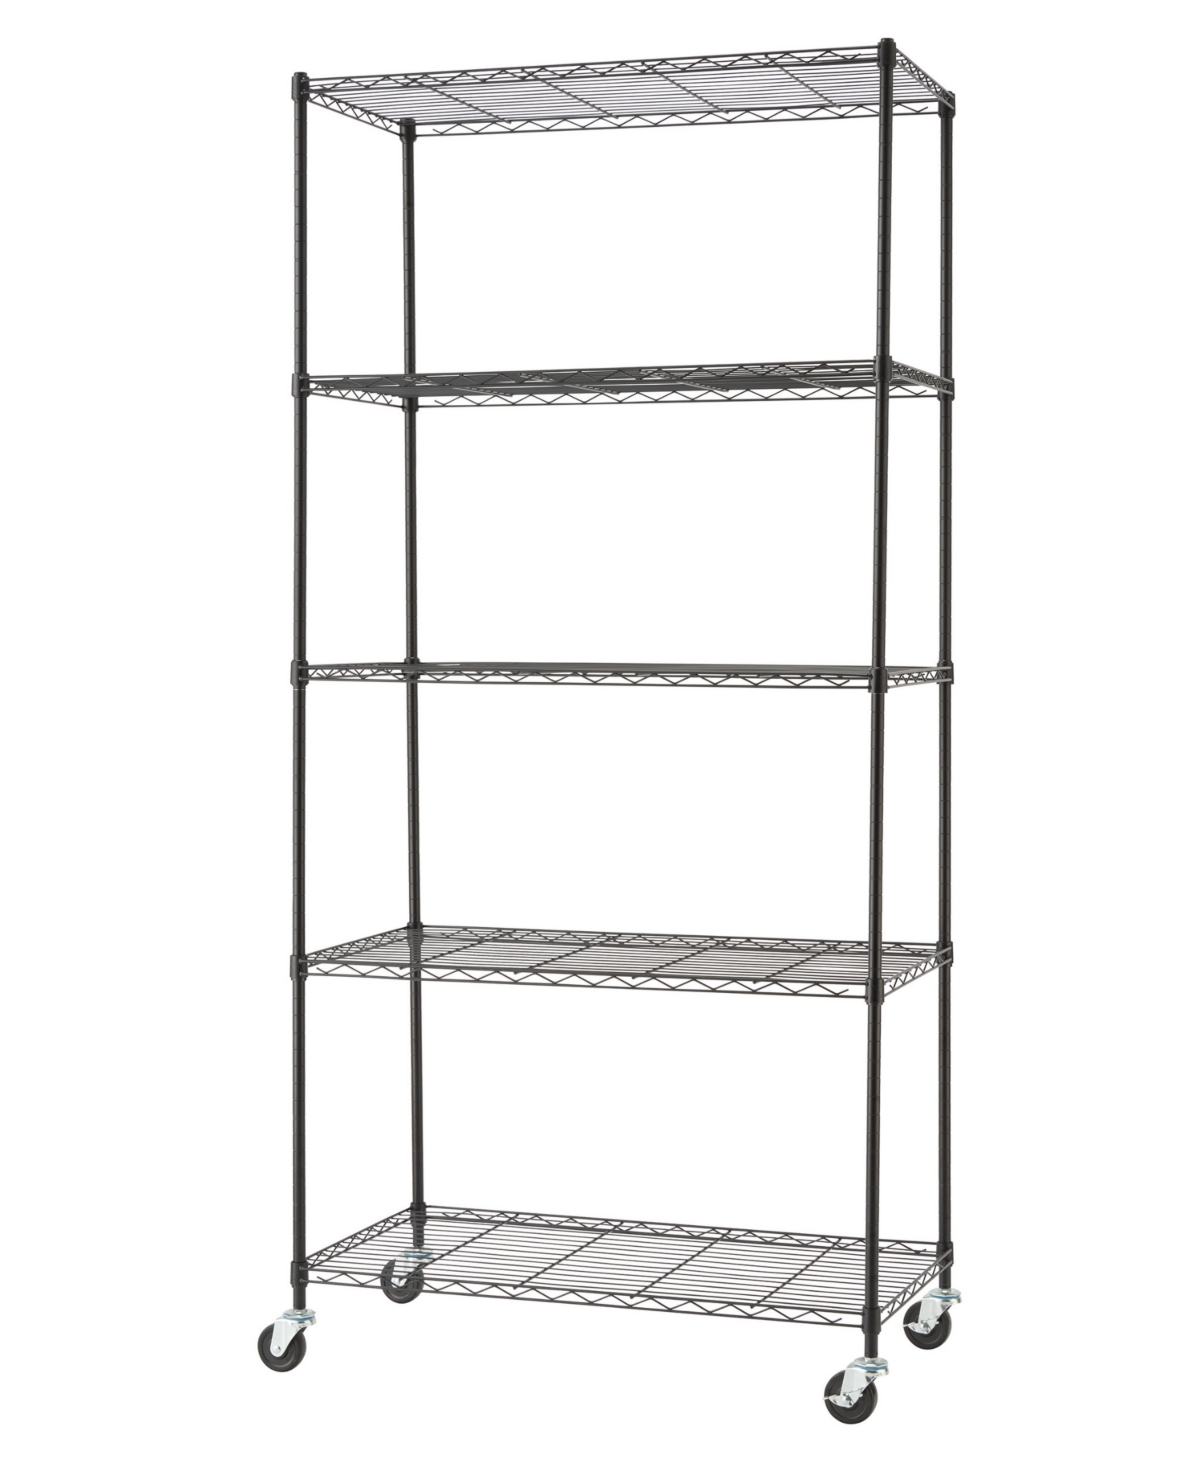 Basics 5-Tier Wire Shelving Rack with Nsf Includes Wheels - Black